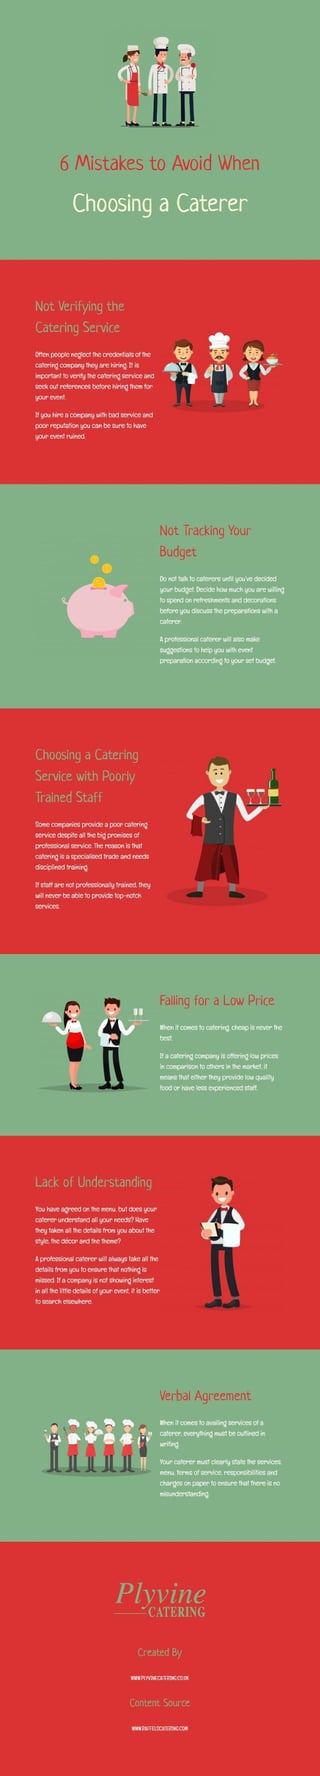 6 mistakes to avoid when choosing a caterer